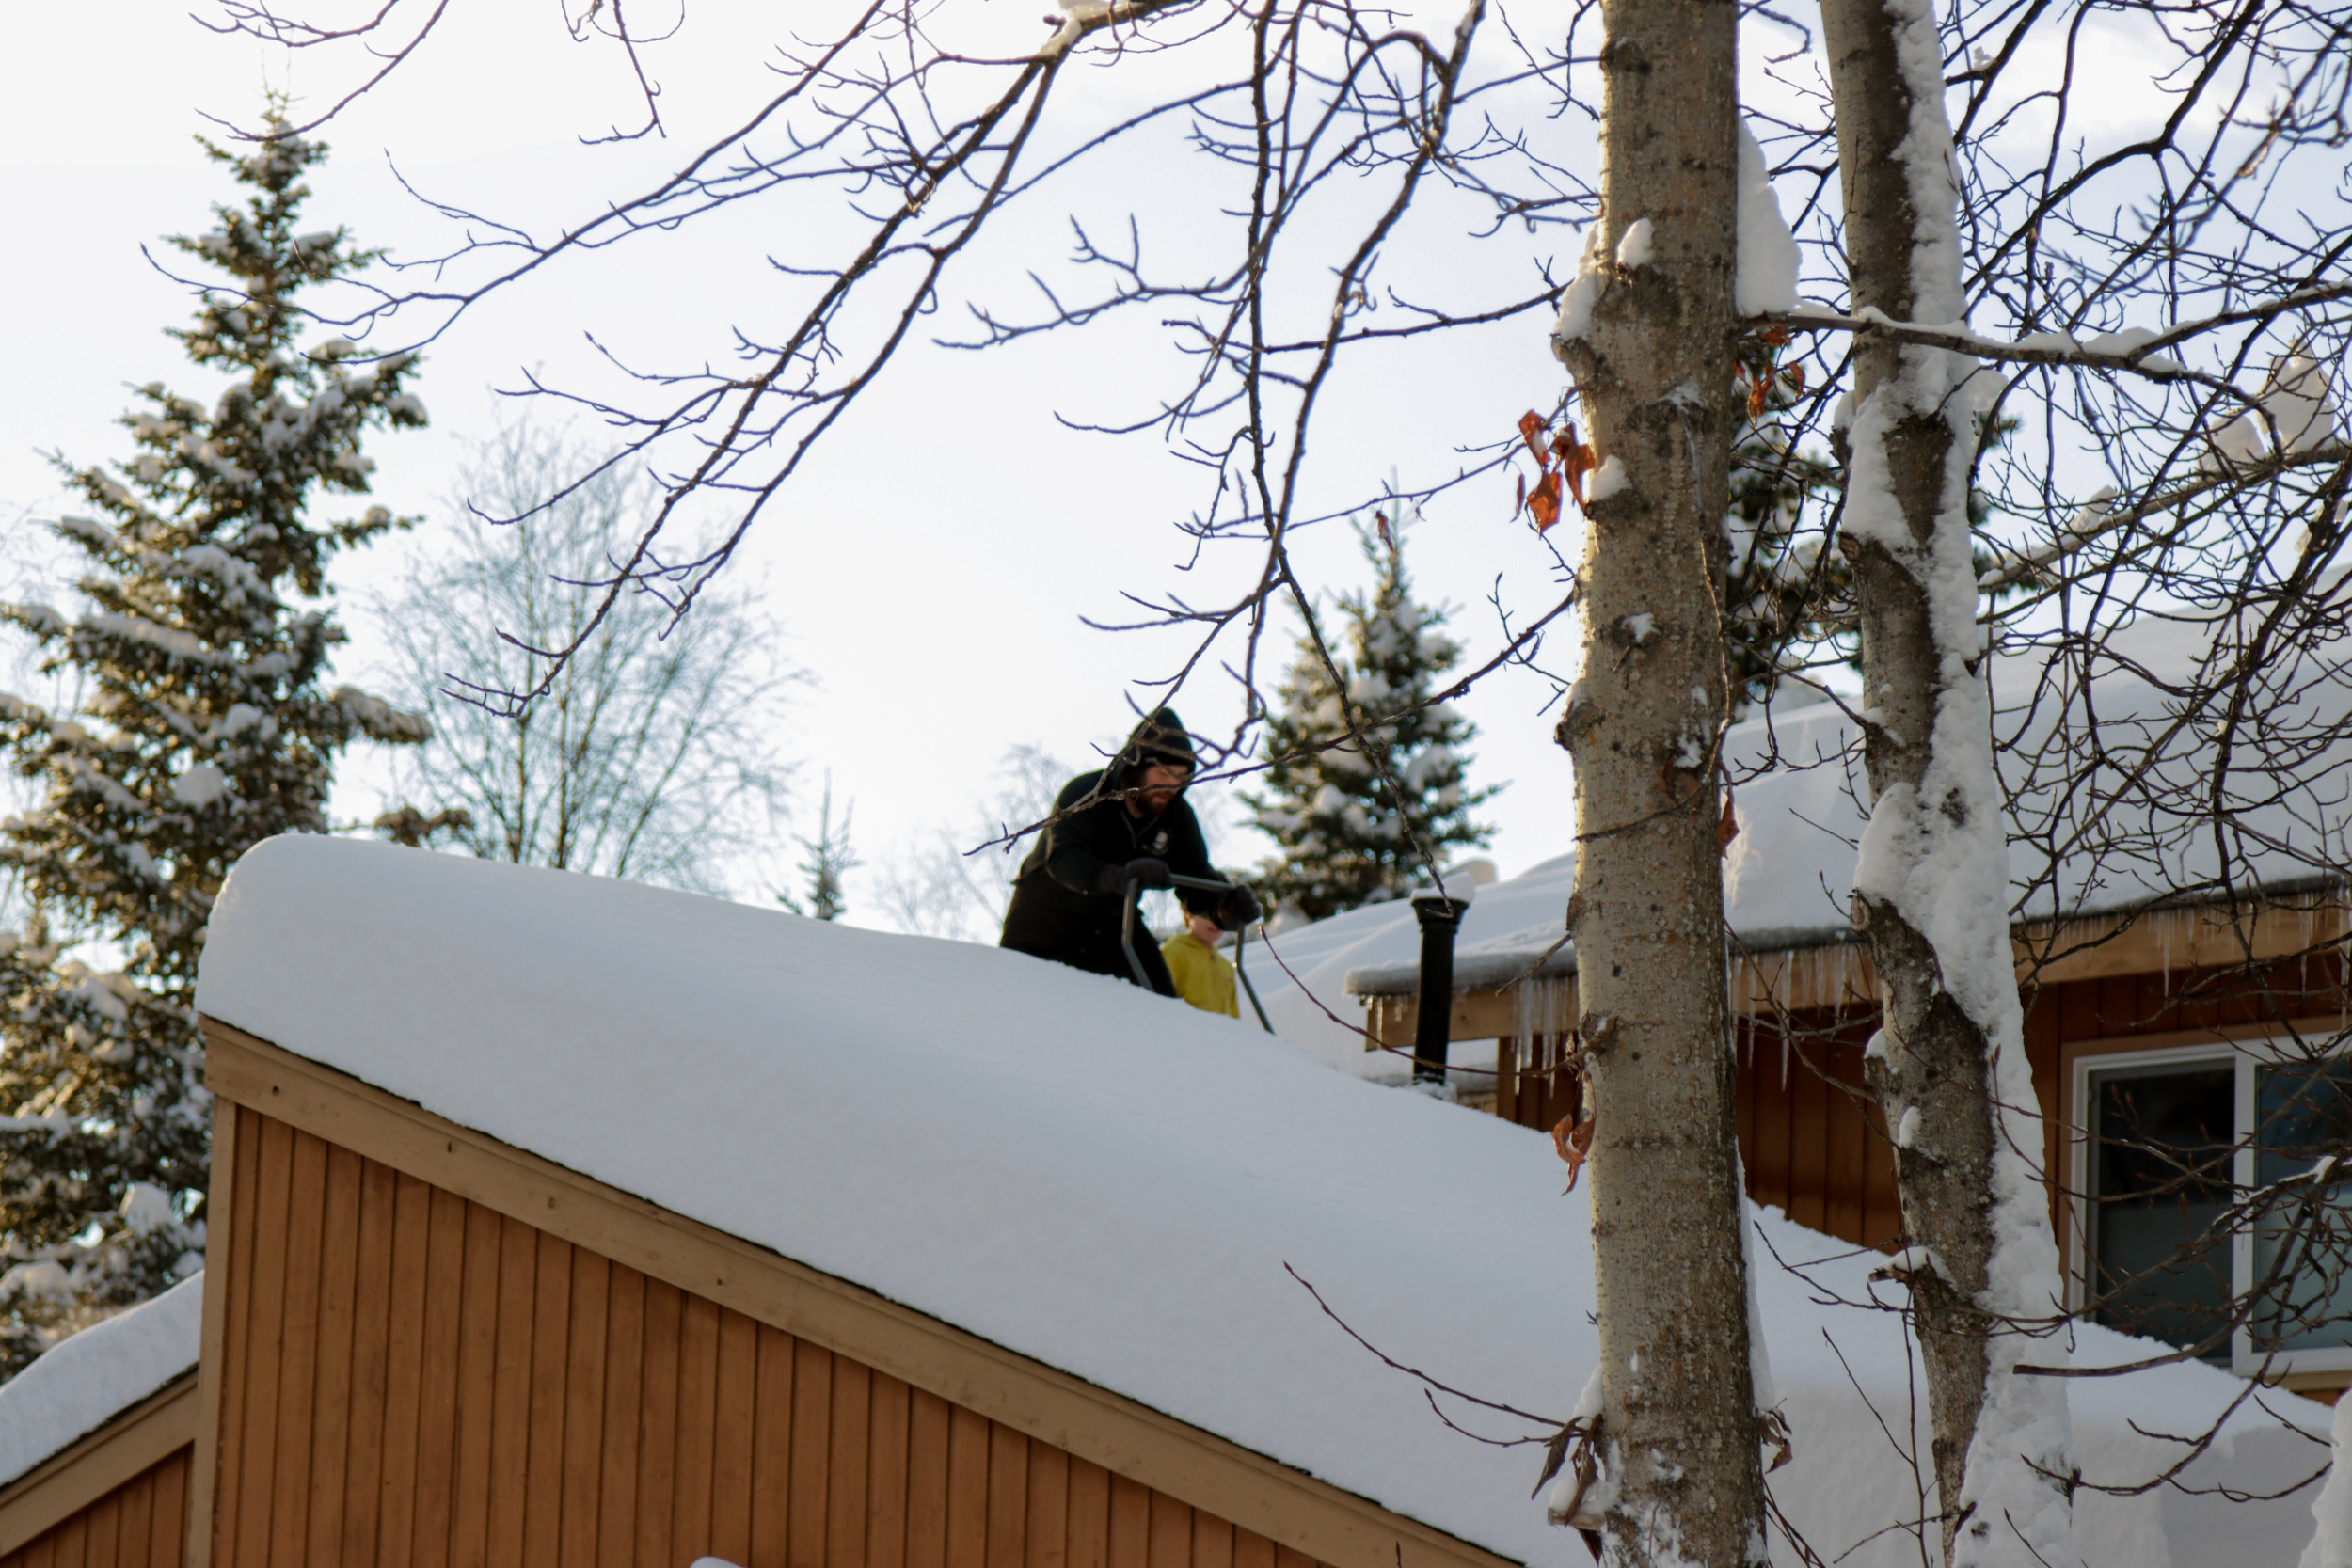 A man uses a push shovel on the snow covered roof of a house.